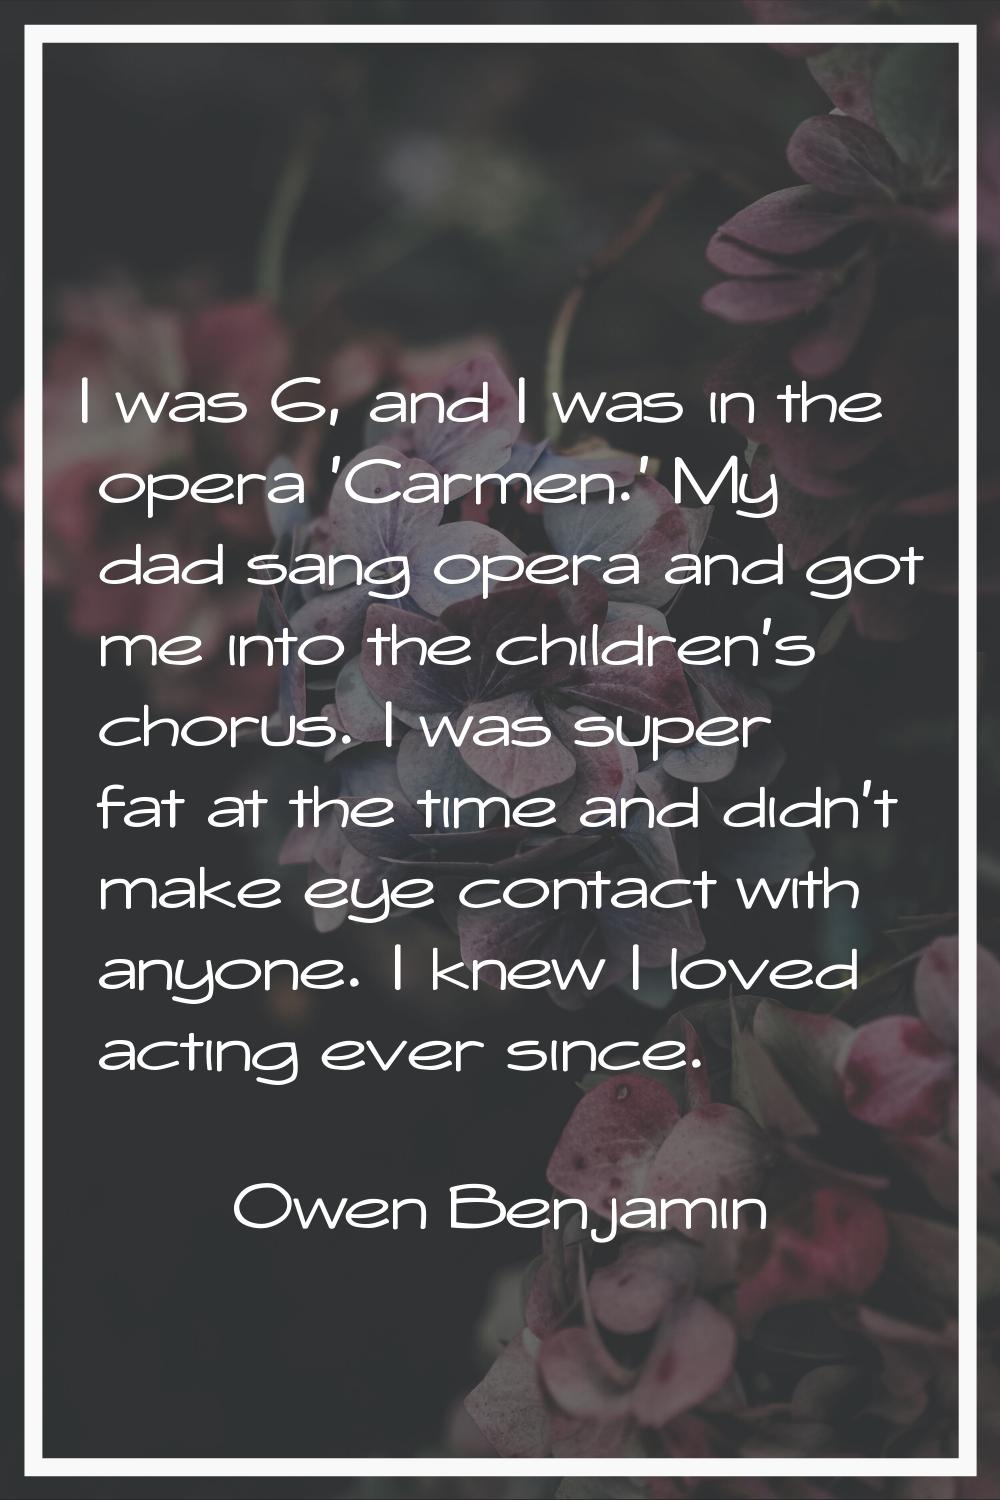 I was 6, and I was in the opera 'Carmen.' My dad sang opera and got me into the children's chorus. 